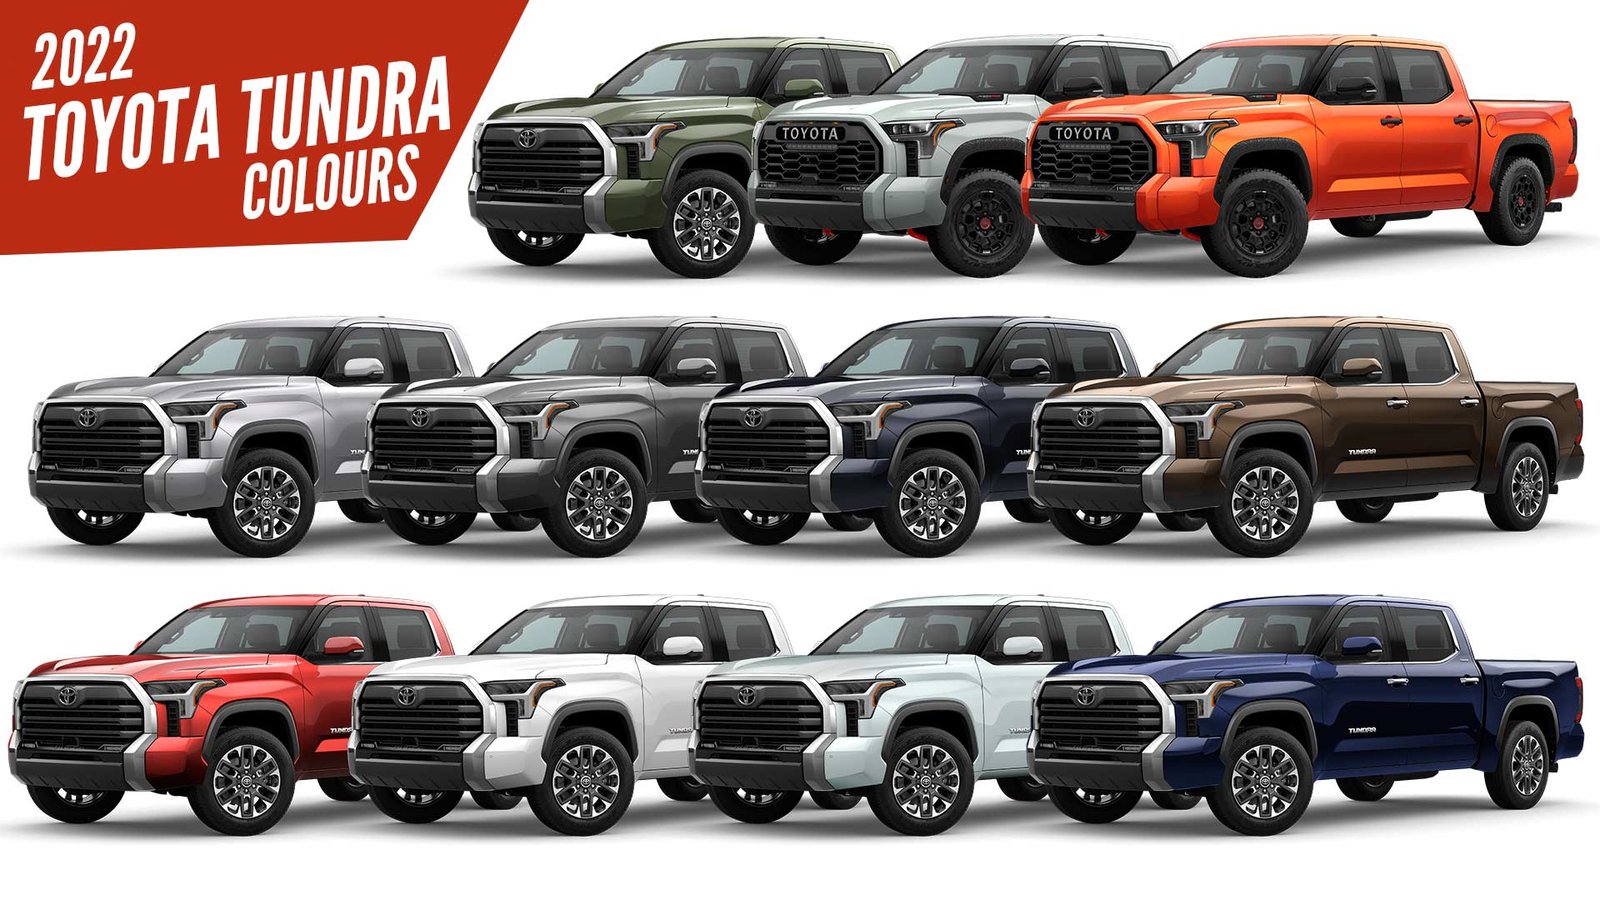 2022 Toyota Tundra Pickup Truck All Color Options Images AUTOBICS